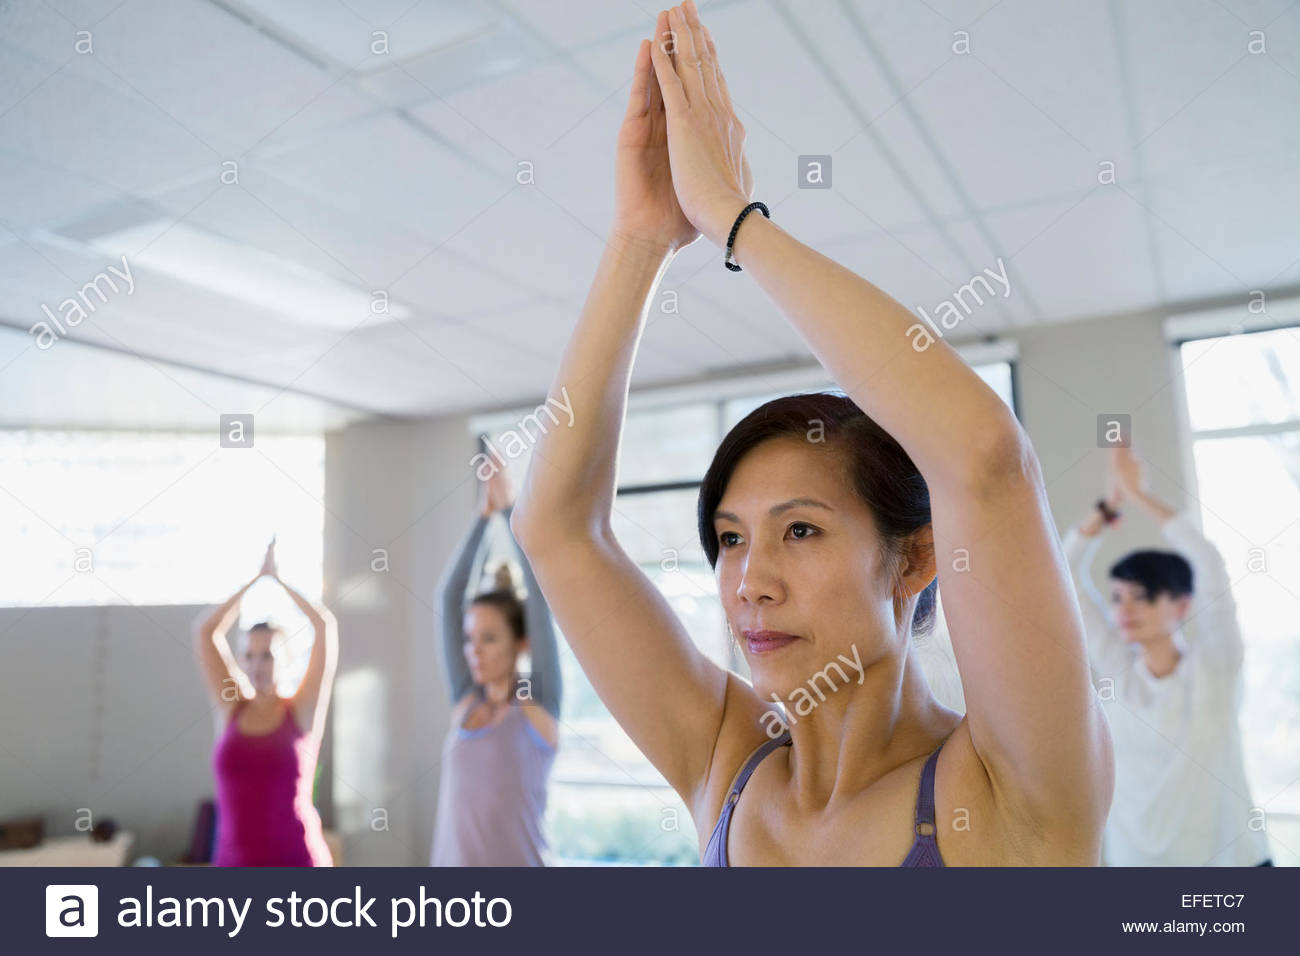 Women with hands clasped overhead in yoga Stock Photo